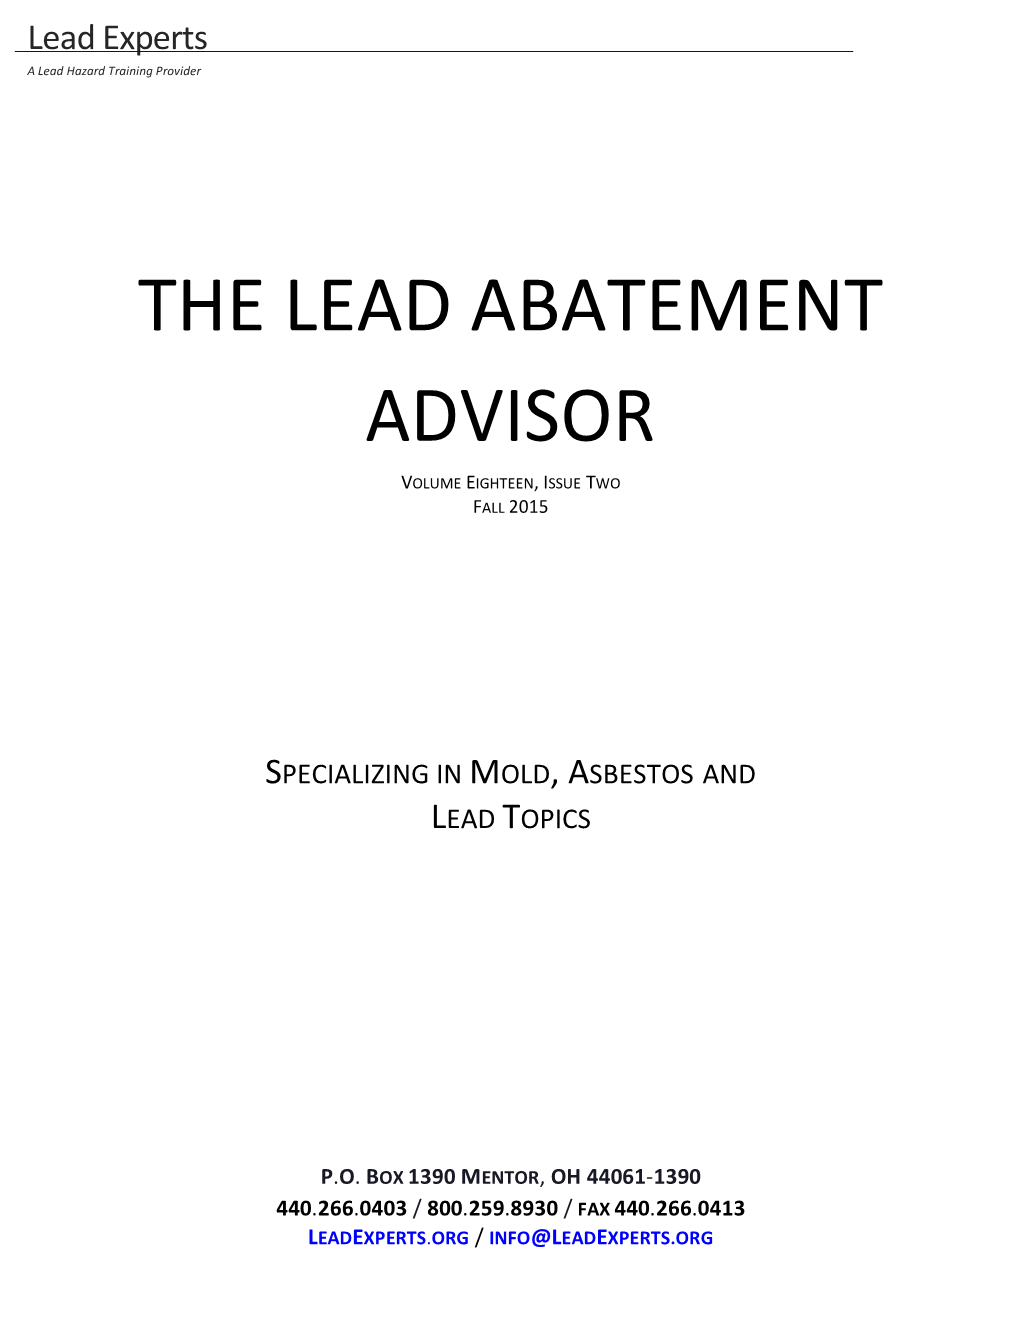 The Lead Abatement Advisor Volume Eighteen, Issue Two Fall 2015